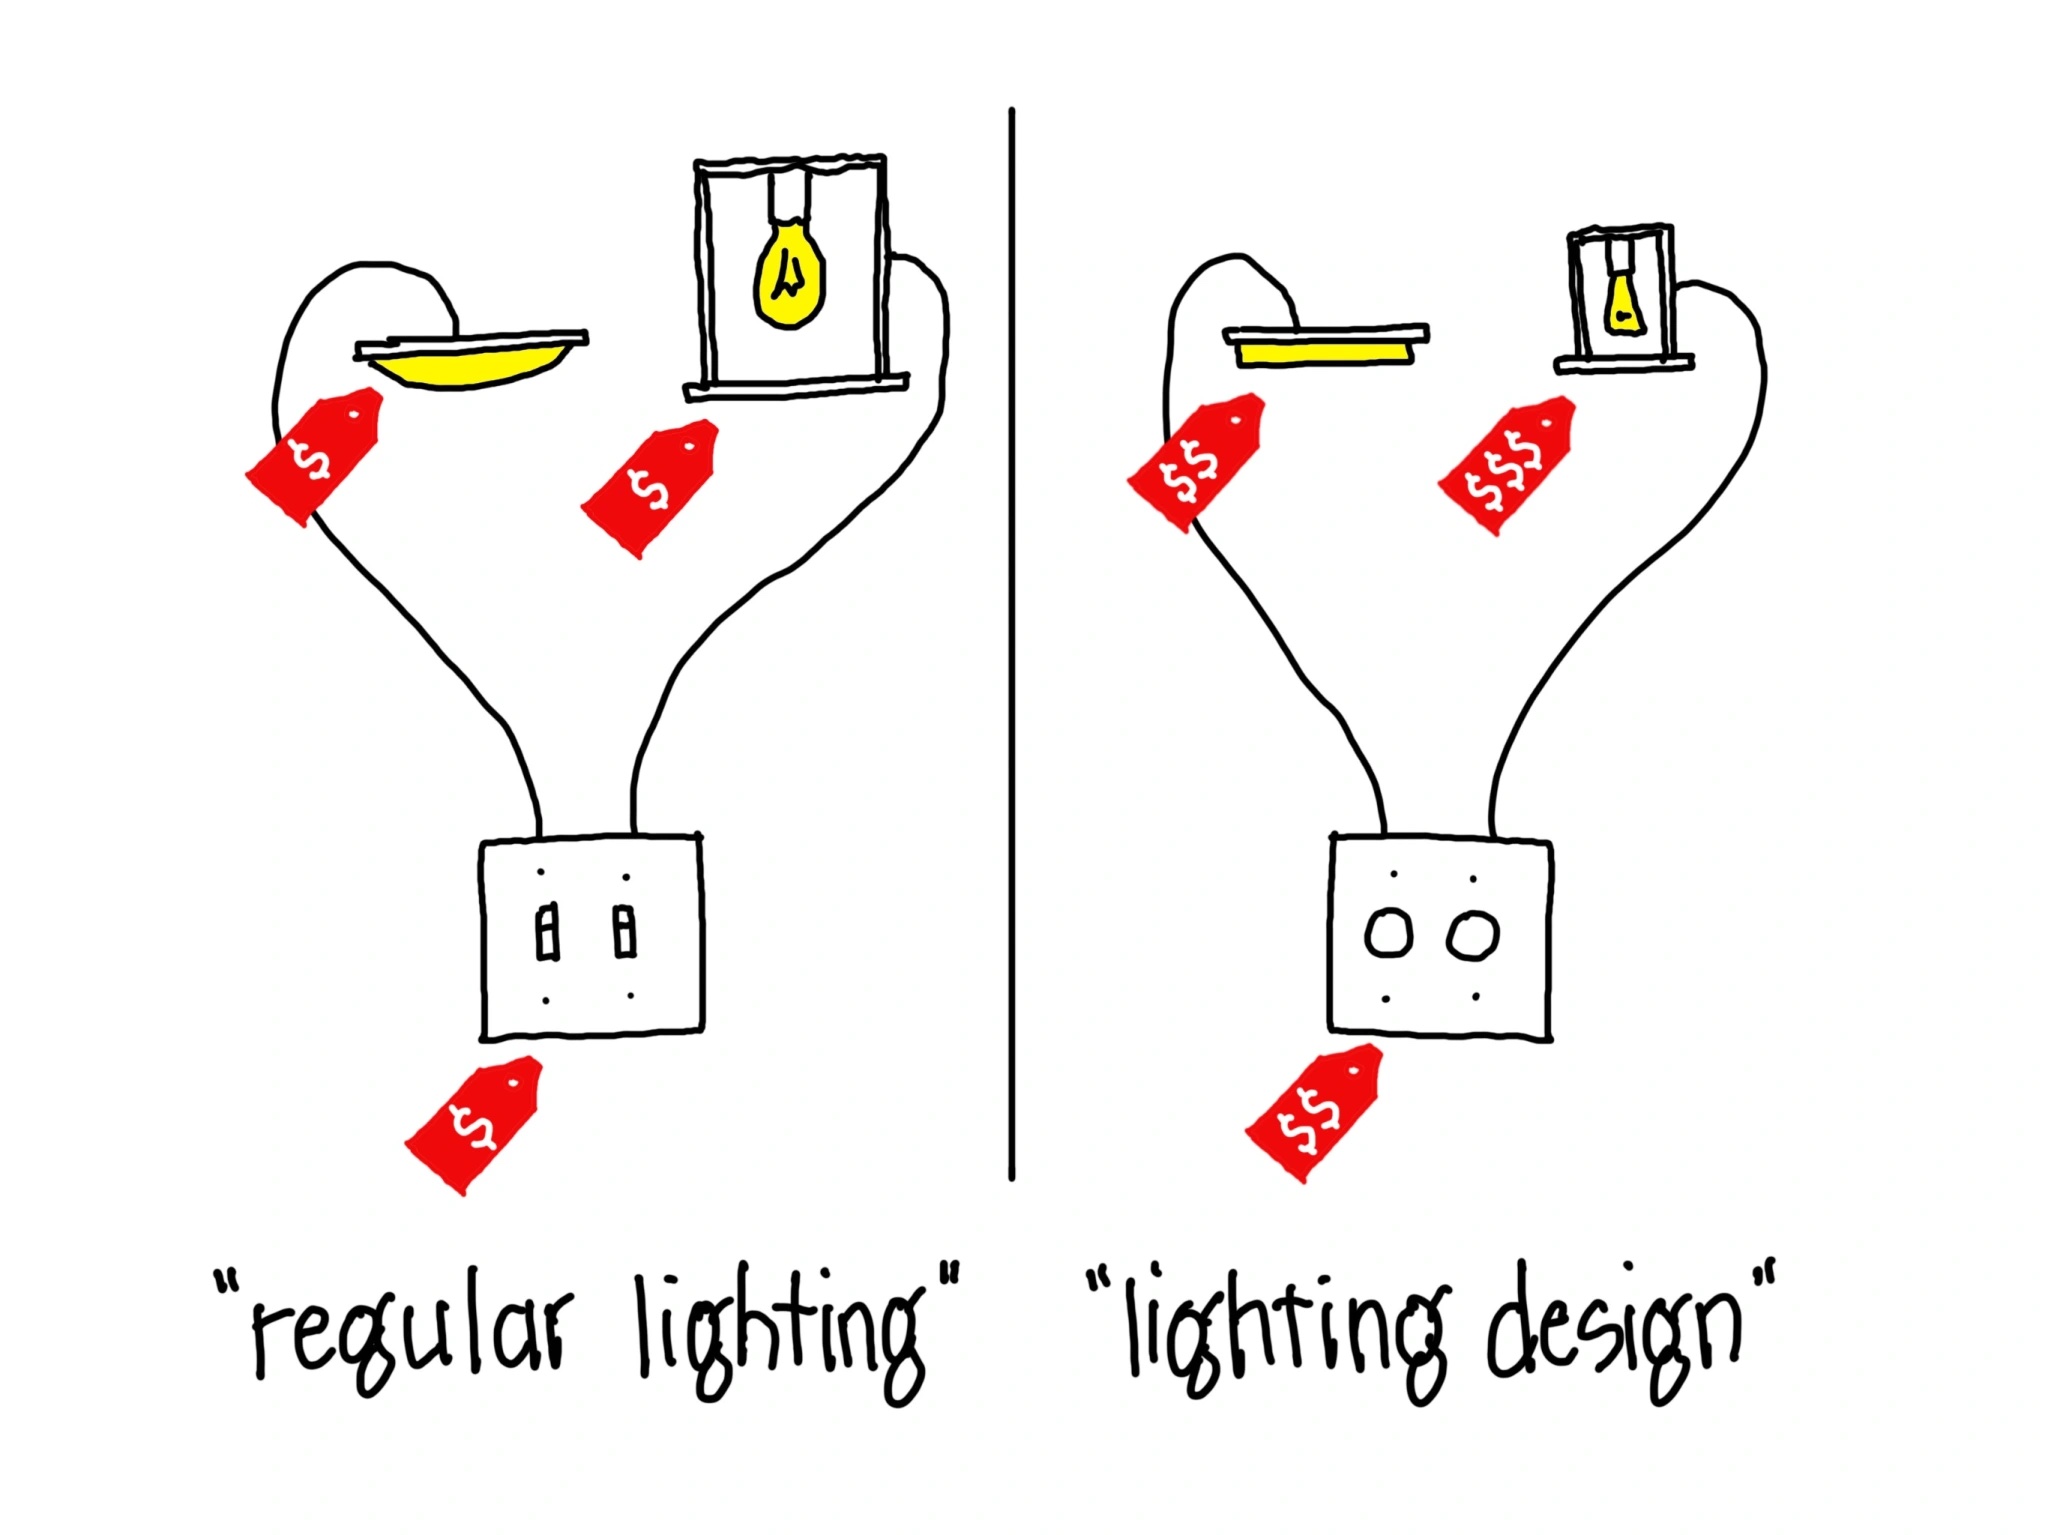 On the left, there is a light switch connected to two light fixtures by a wire. All three items have a red tag with a white $ indicating that this is an affordable setup. On the right, there is the same setup with slight variations on details, making the items more elegant. The red tags on these show two and three $ indicating that it is more expensive. Below the left section, text reads in quotation marks "regular lighting." The text below the right section reads in quotation marks "lighting design."